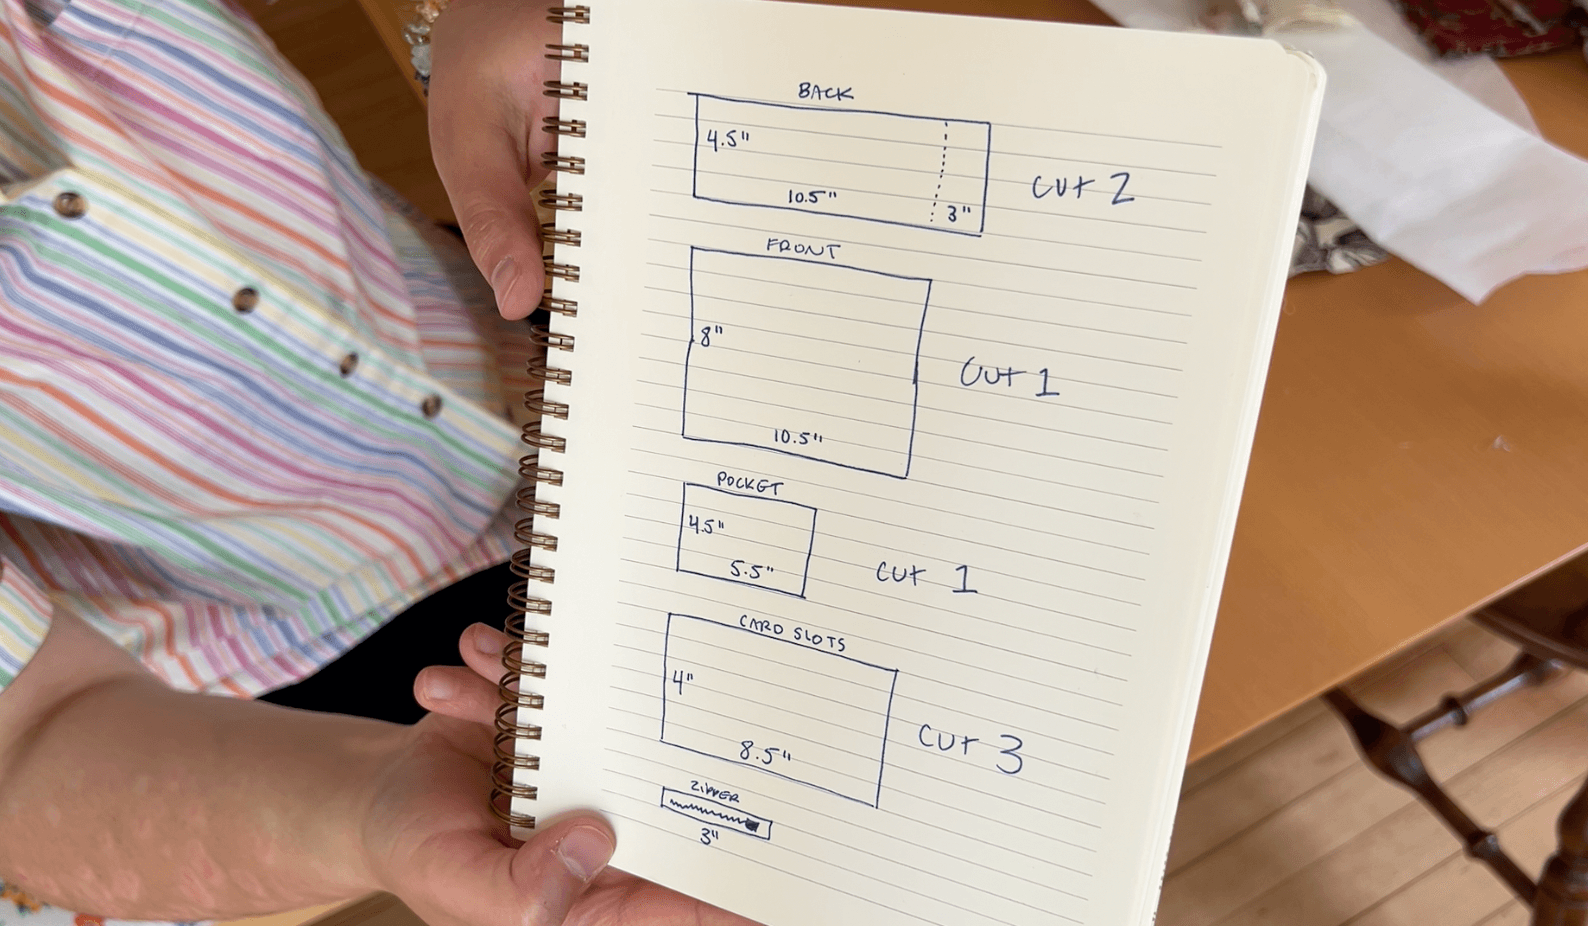 A note book page showing all the measurements for the pieces